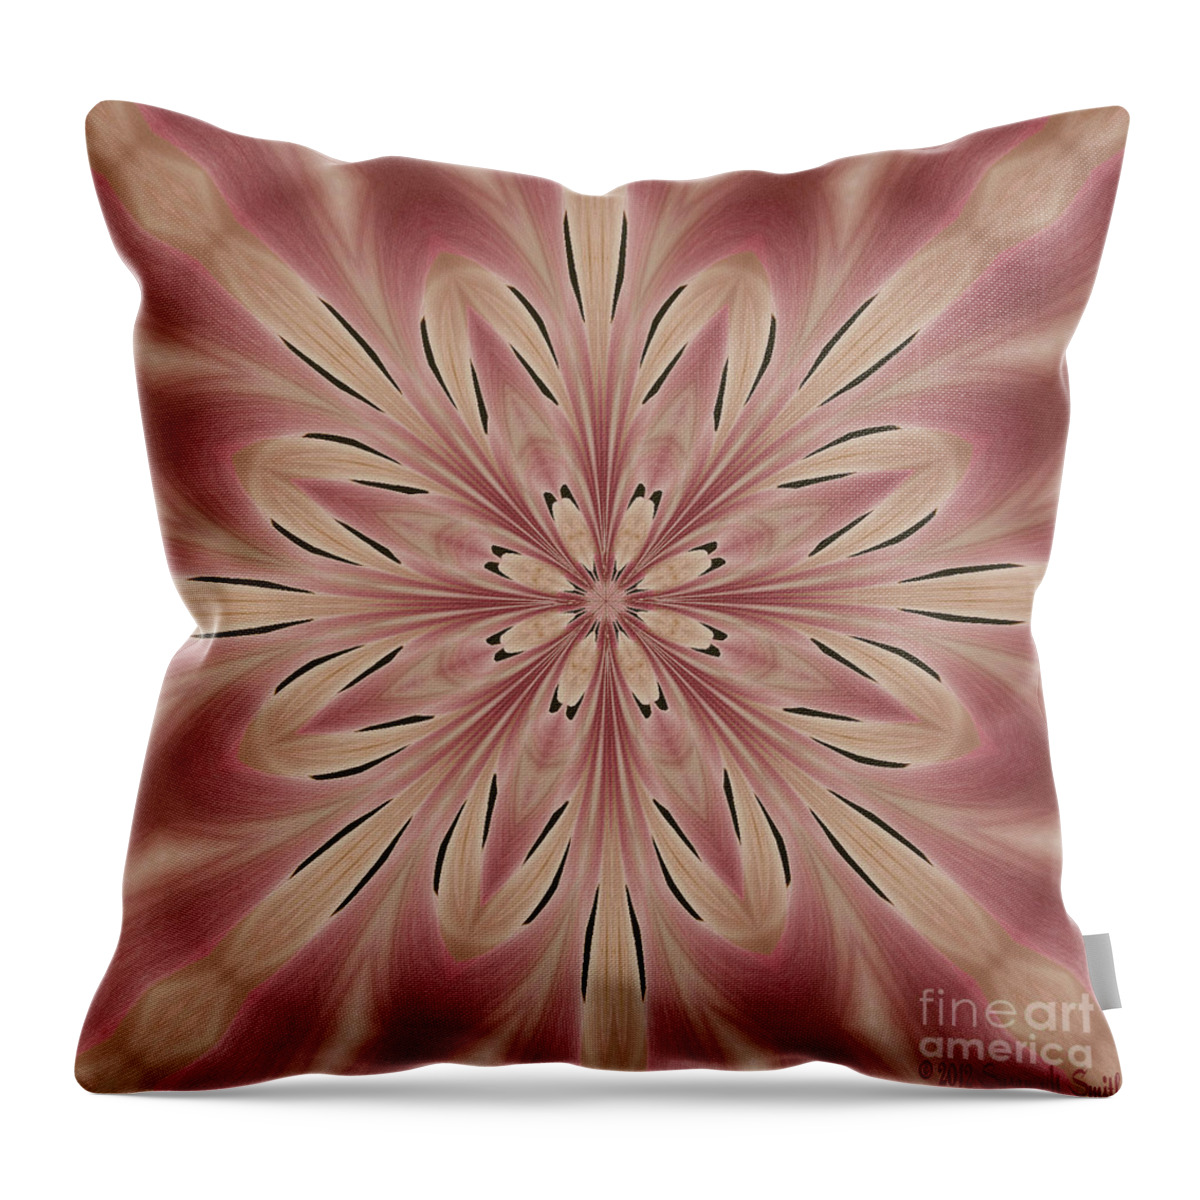 Photograph Throw Pillow featuring the photograph Star Magnolia Medallion 3 by Susan Smith